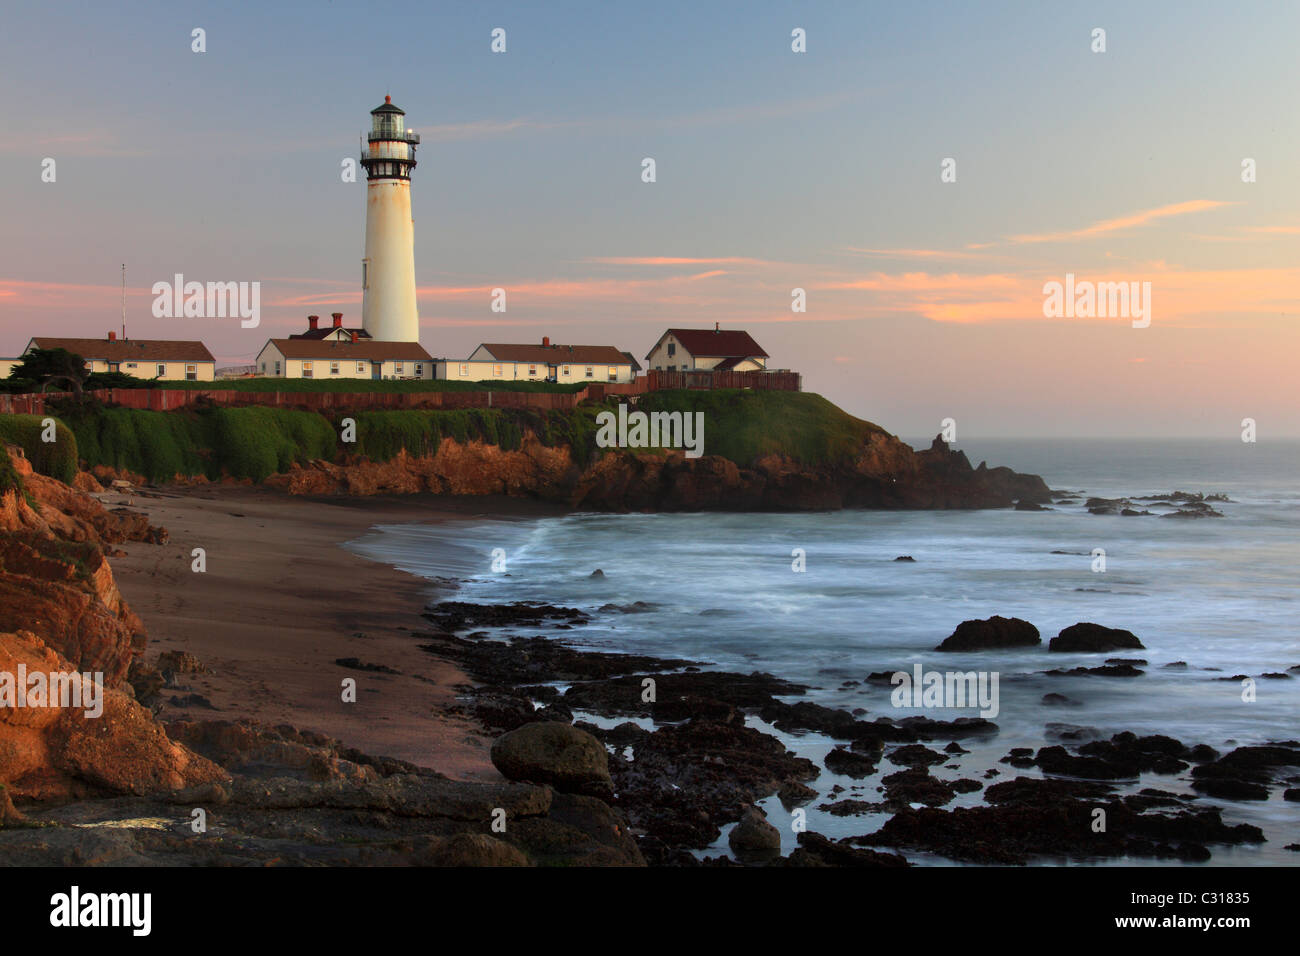 Pigeon Pt. Light Station and coastal cliffs late afternoon, California coast, United States Stock Photo